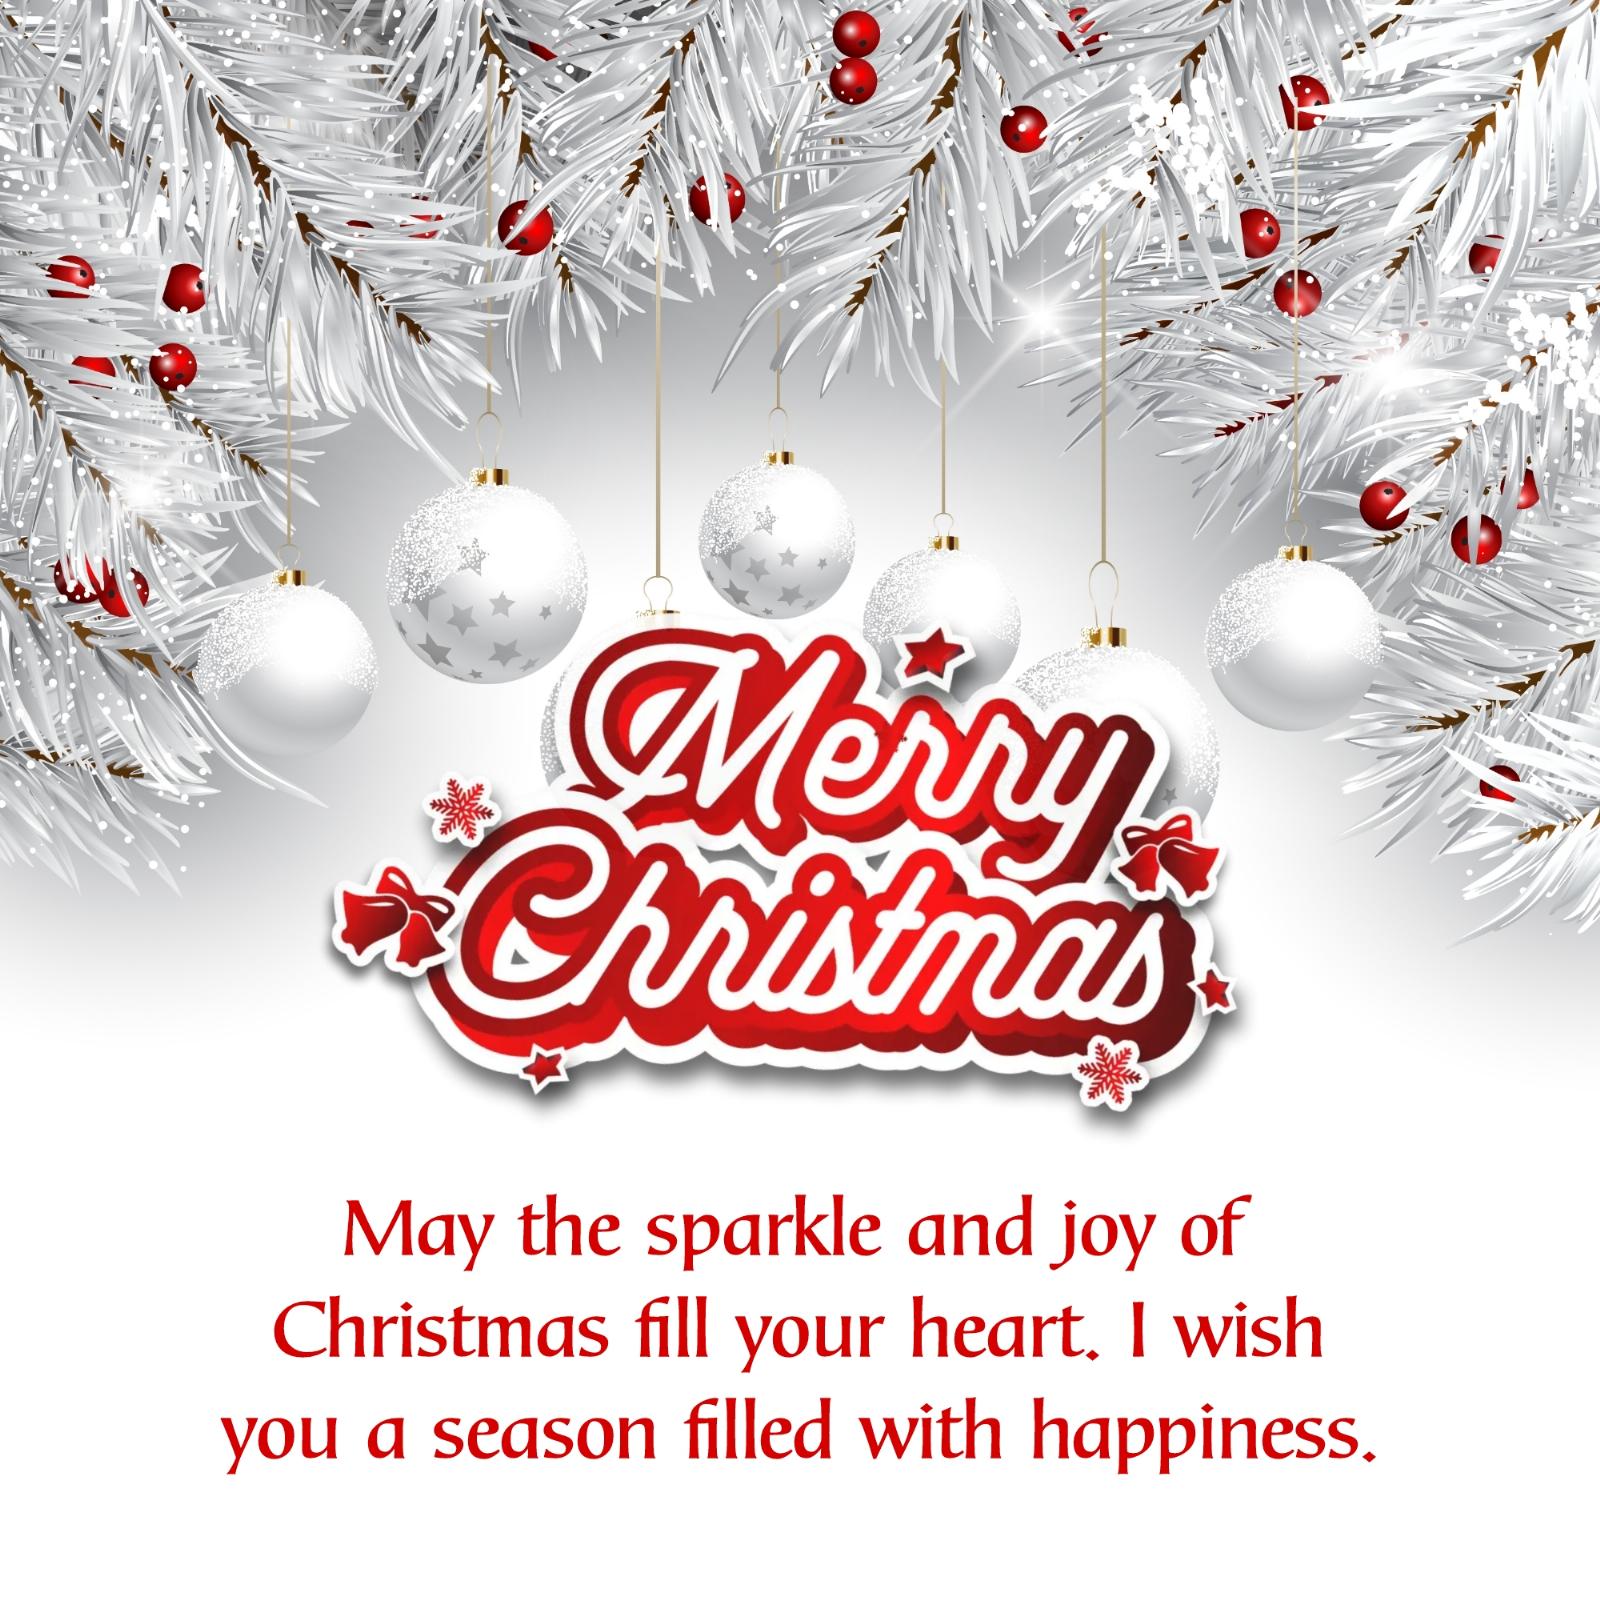 May the sparkle and joy of Christmas fill your heart